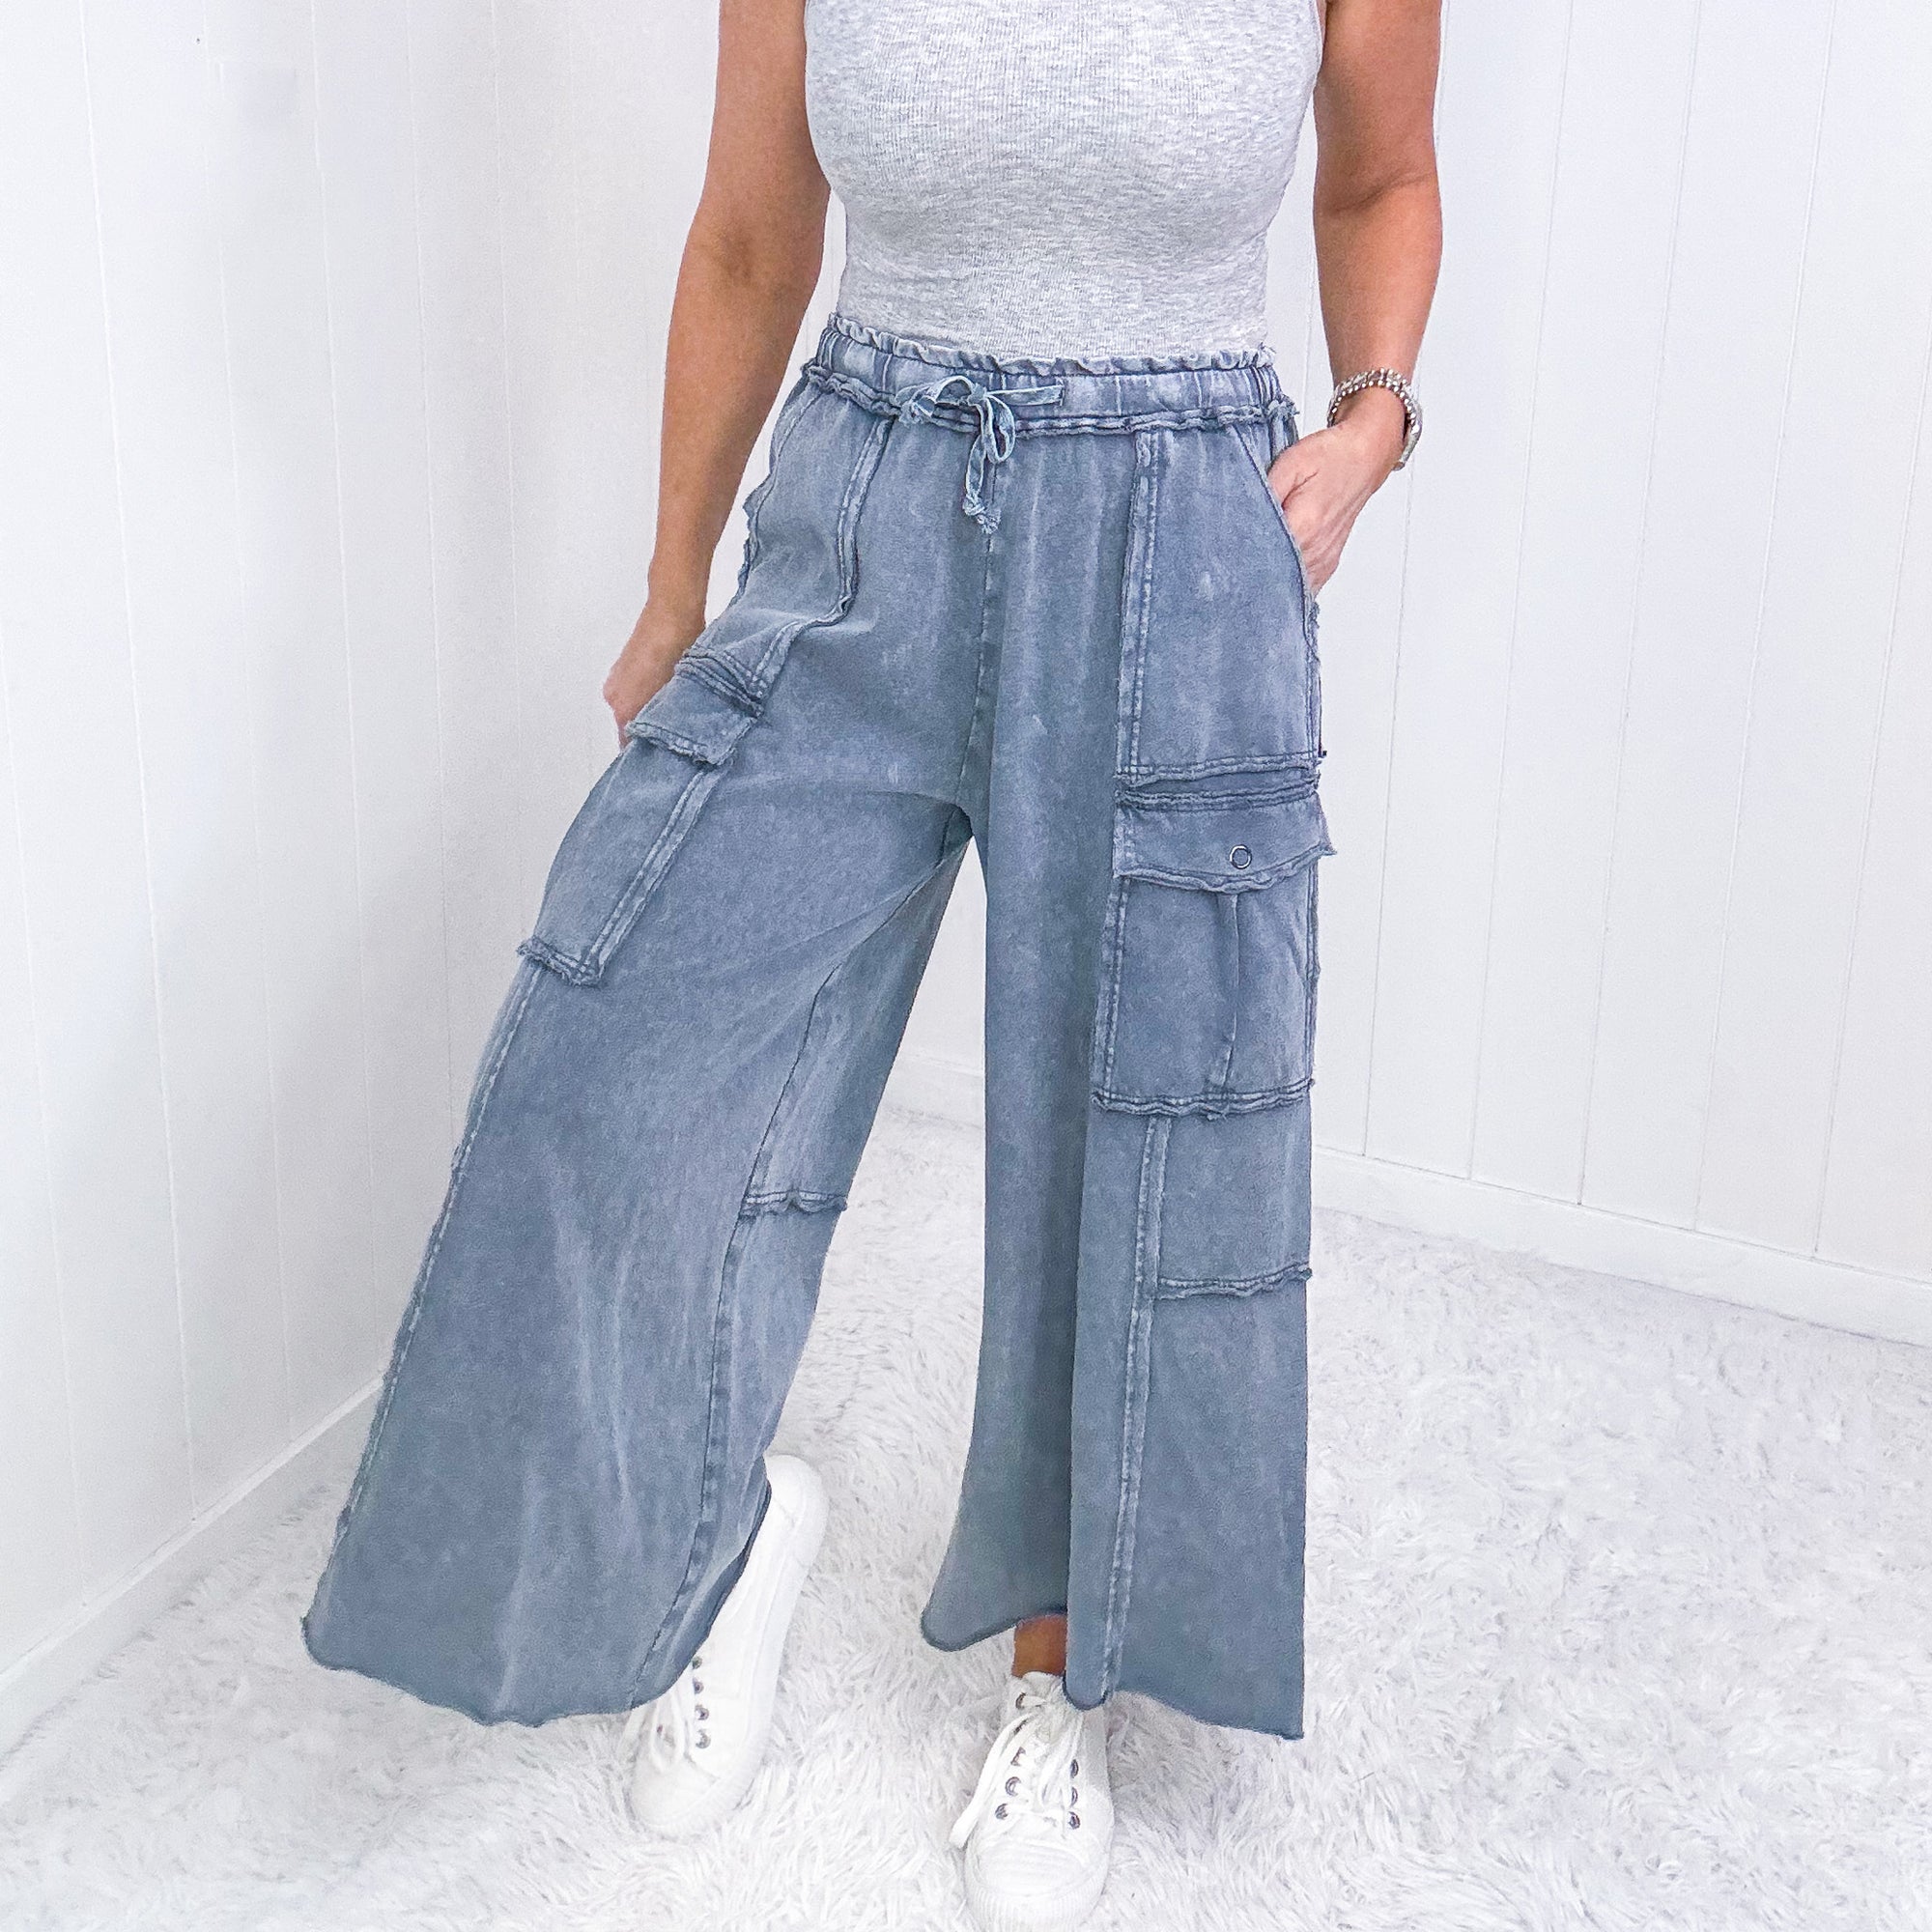 Feeling Good Cropped Relaxed Mineral Washed Wide Leg Cargo Pants - Boujee Boutique 